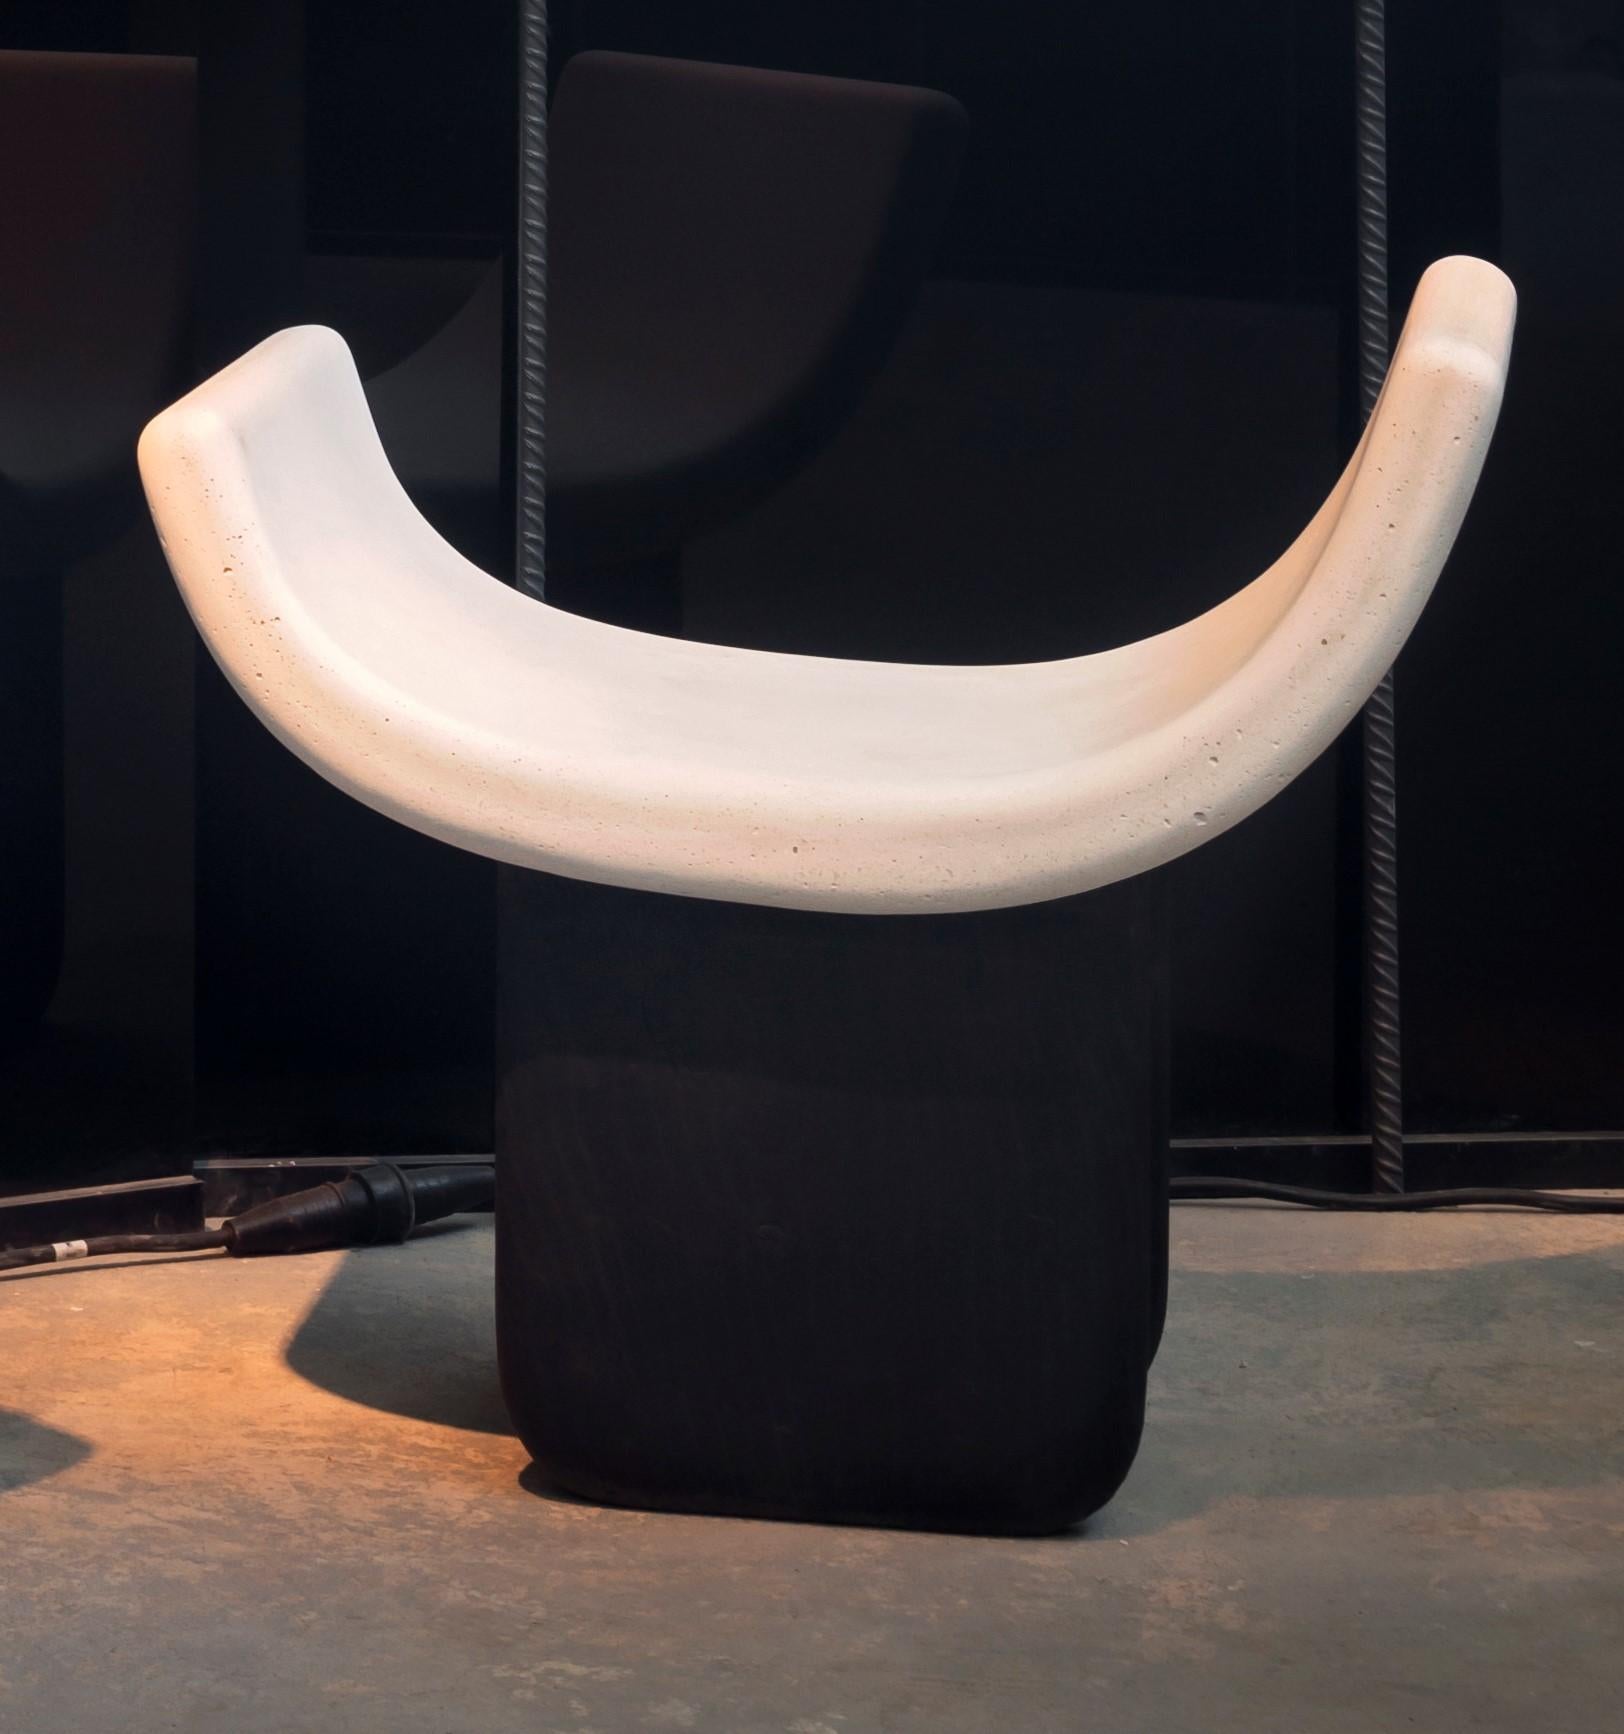 Monolithic chair 2 by Studiopepe
Dimensions: W 80 x D 50 x H 76 cm
Materials: Concrete and Marble.

Multifaceted design agency Studiopepe was founded in Milan in 2006. Eclectic, voguish, it is the
brainchild of Chiara di Pinto and Arianna Lelli